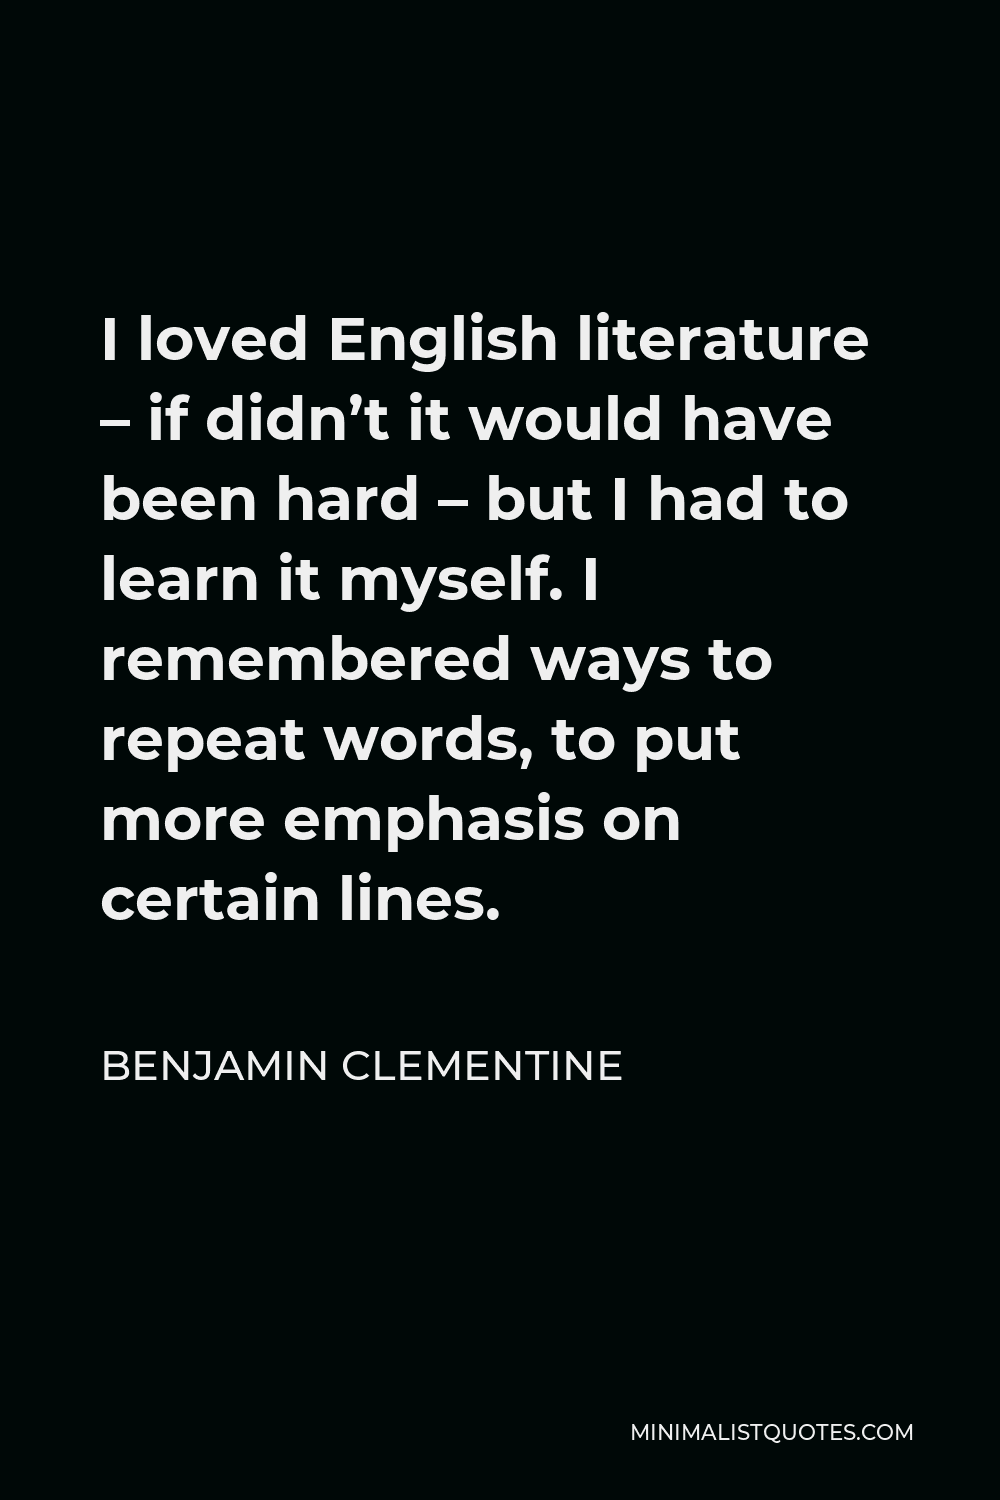 Benjamin Clementine Quote - I loved English literature – if didn’t it would have been hard – but I had to learn it myself. I remembered ways to repeat words, to put more emphasis on certain lines.